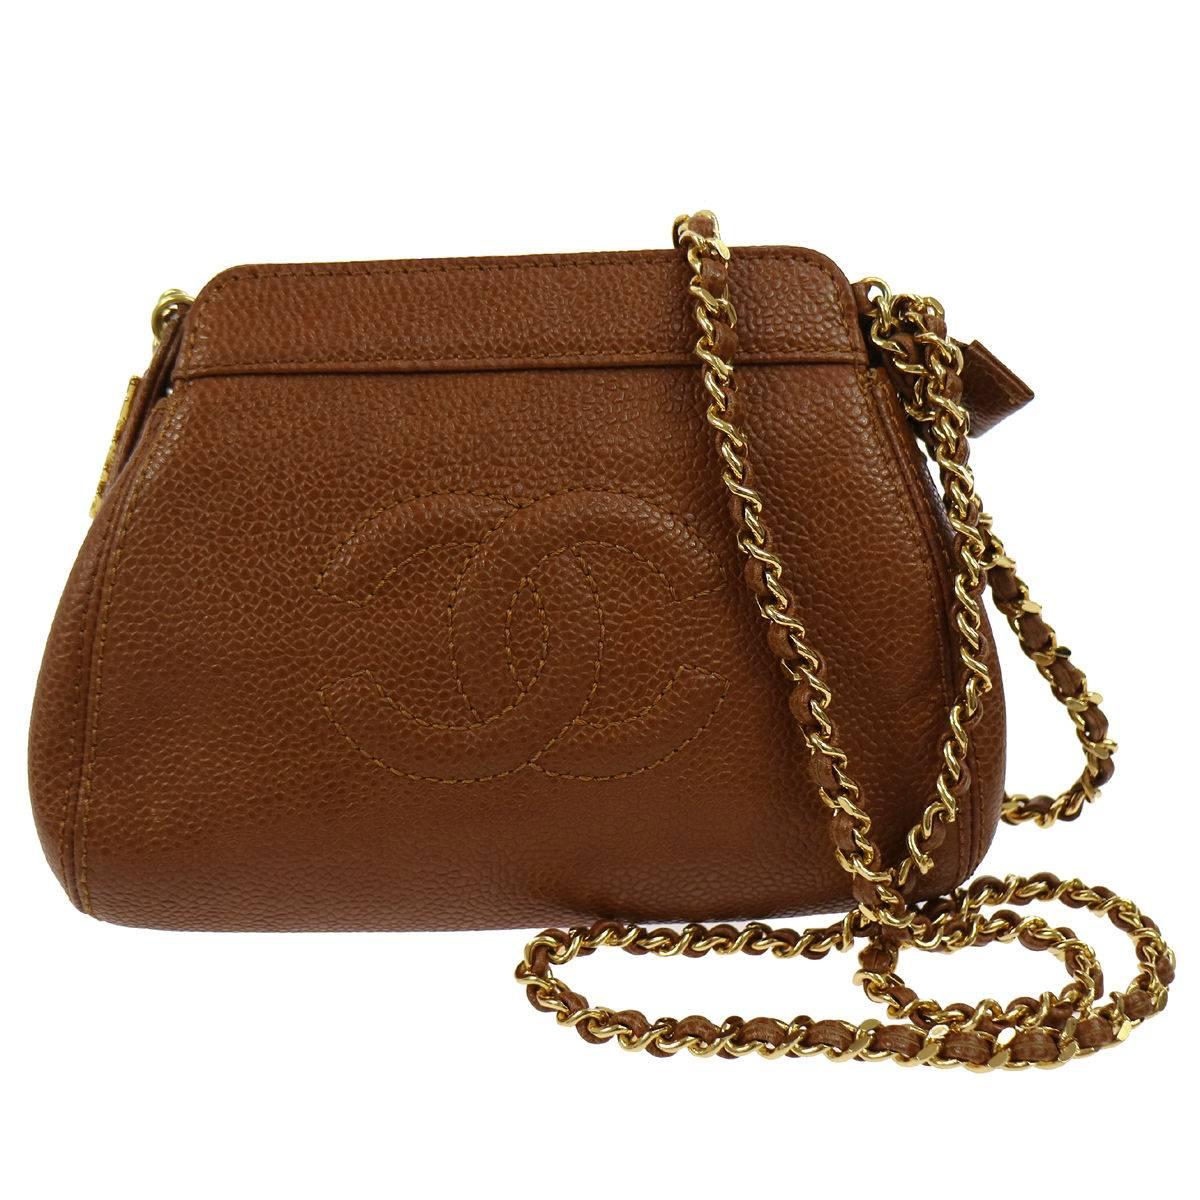 Chanel Brown Caviar Leather with Gold Chain Strap Shoulder Bag 